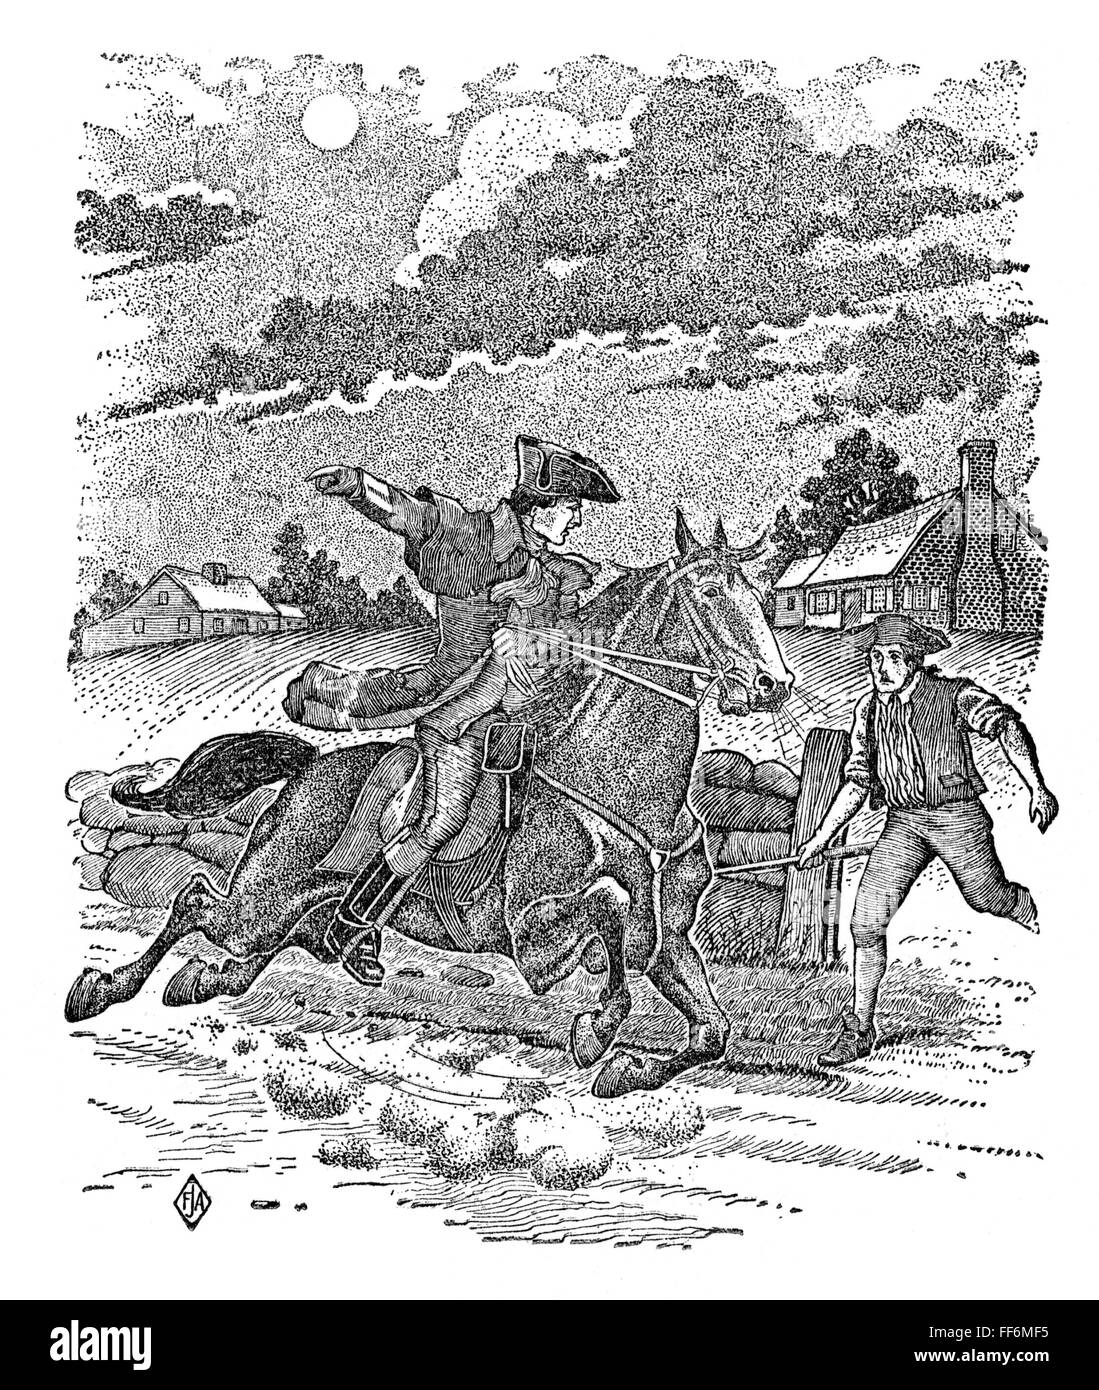 PAUL REVERE'S RIDE /nfrom Boston to Lexington, April 18, 1775. Lithograph, late 19th century. Stock Photo